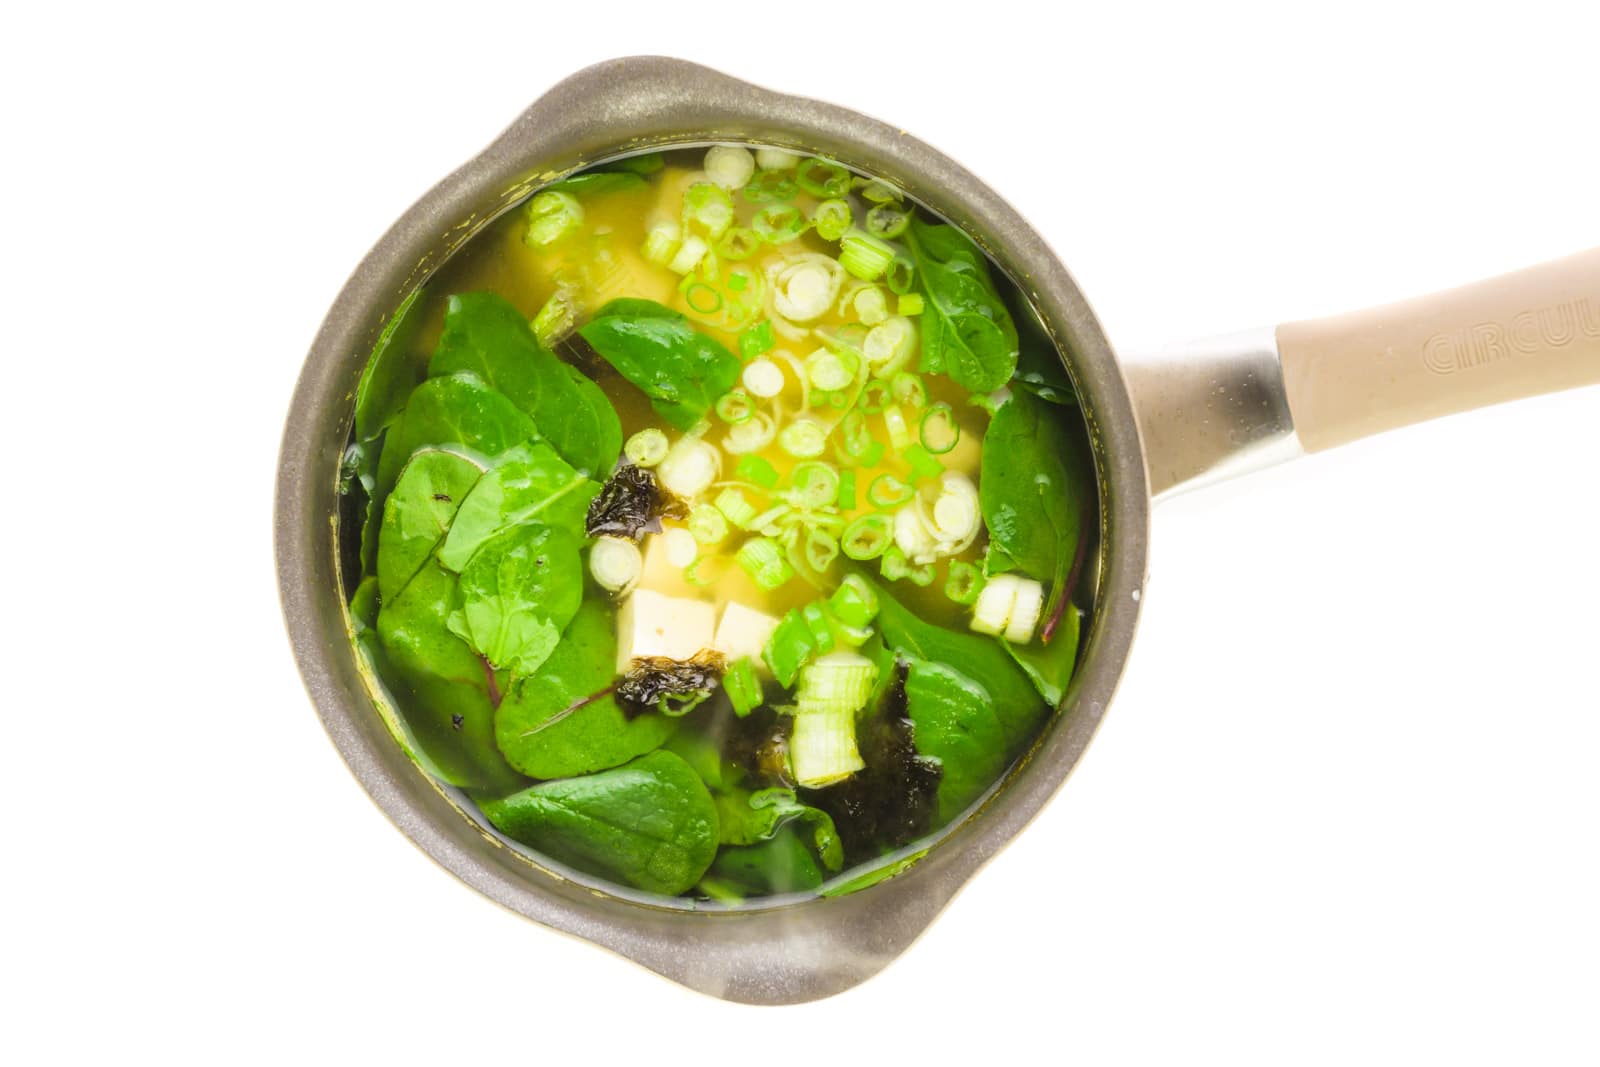 Looking down on a saucepan with greens, tofu, and cut green onions.